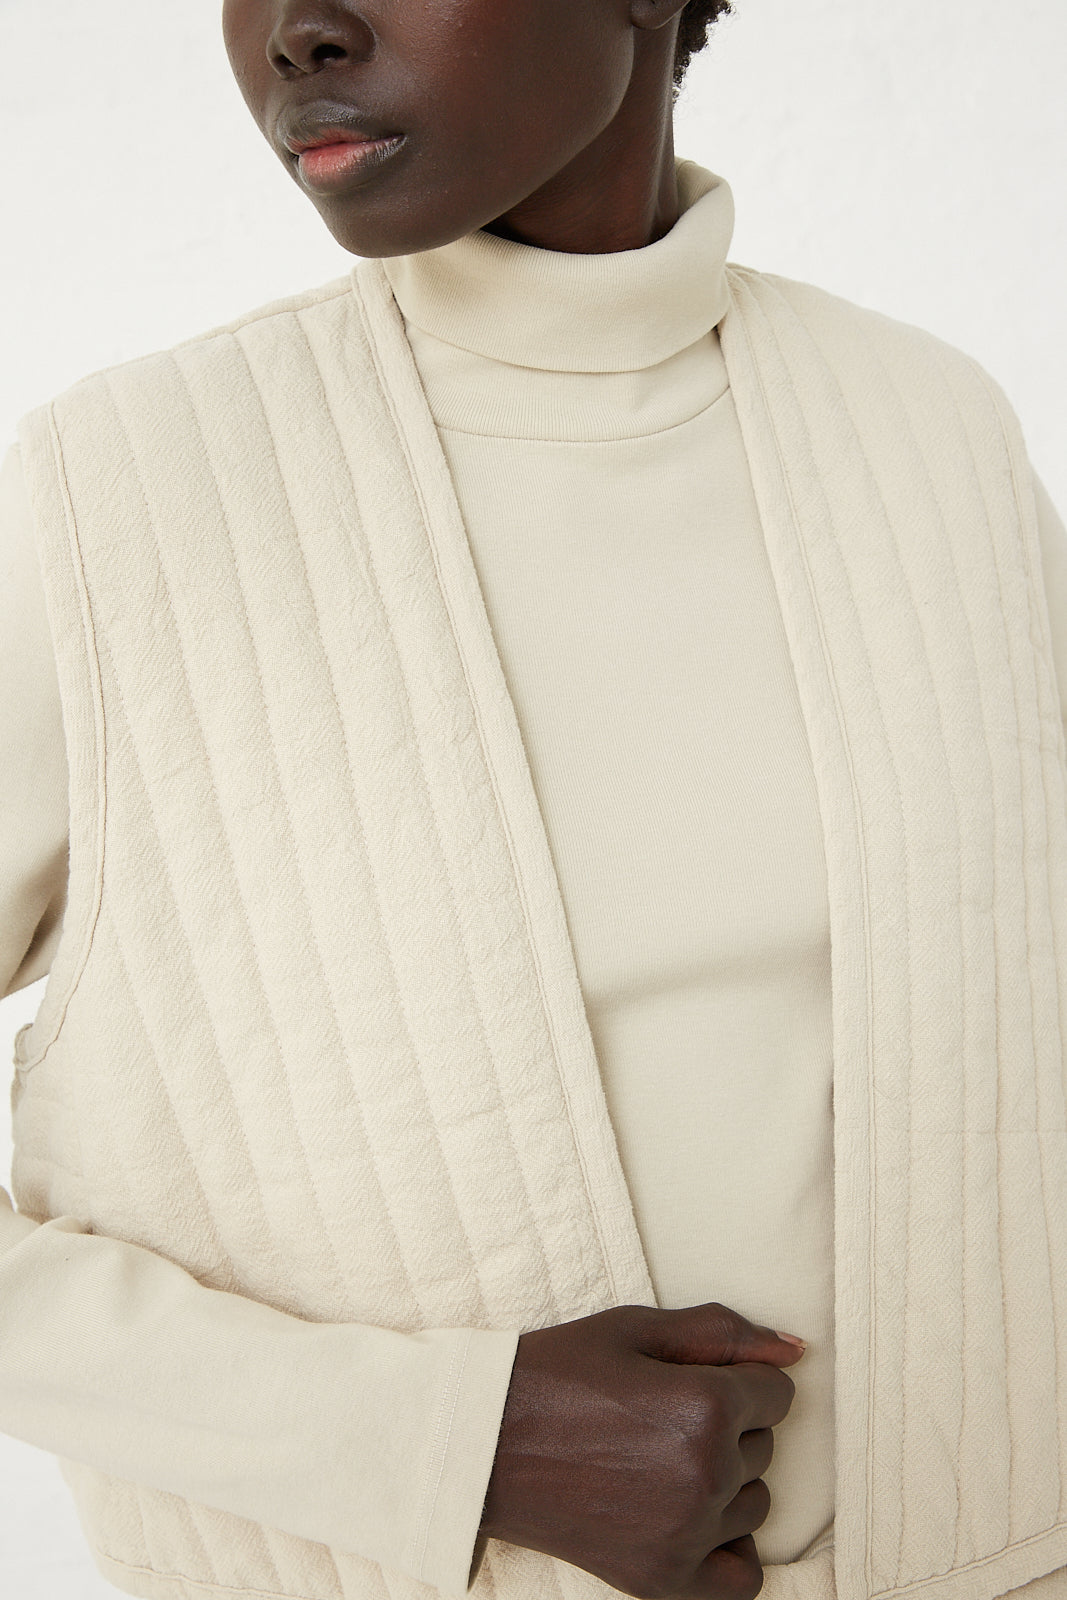 A quilted vest in ivory worn by a black woman, created by the Los Angeles-based label Black Crane.